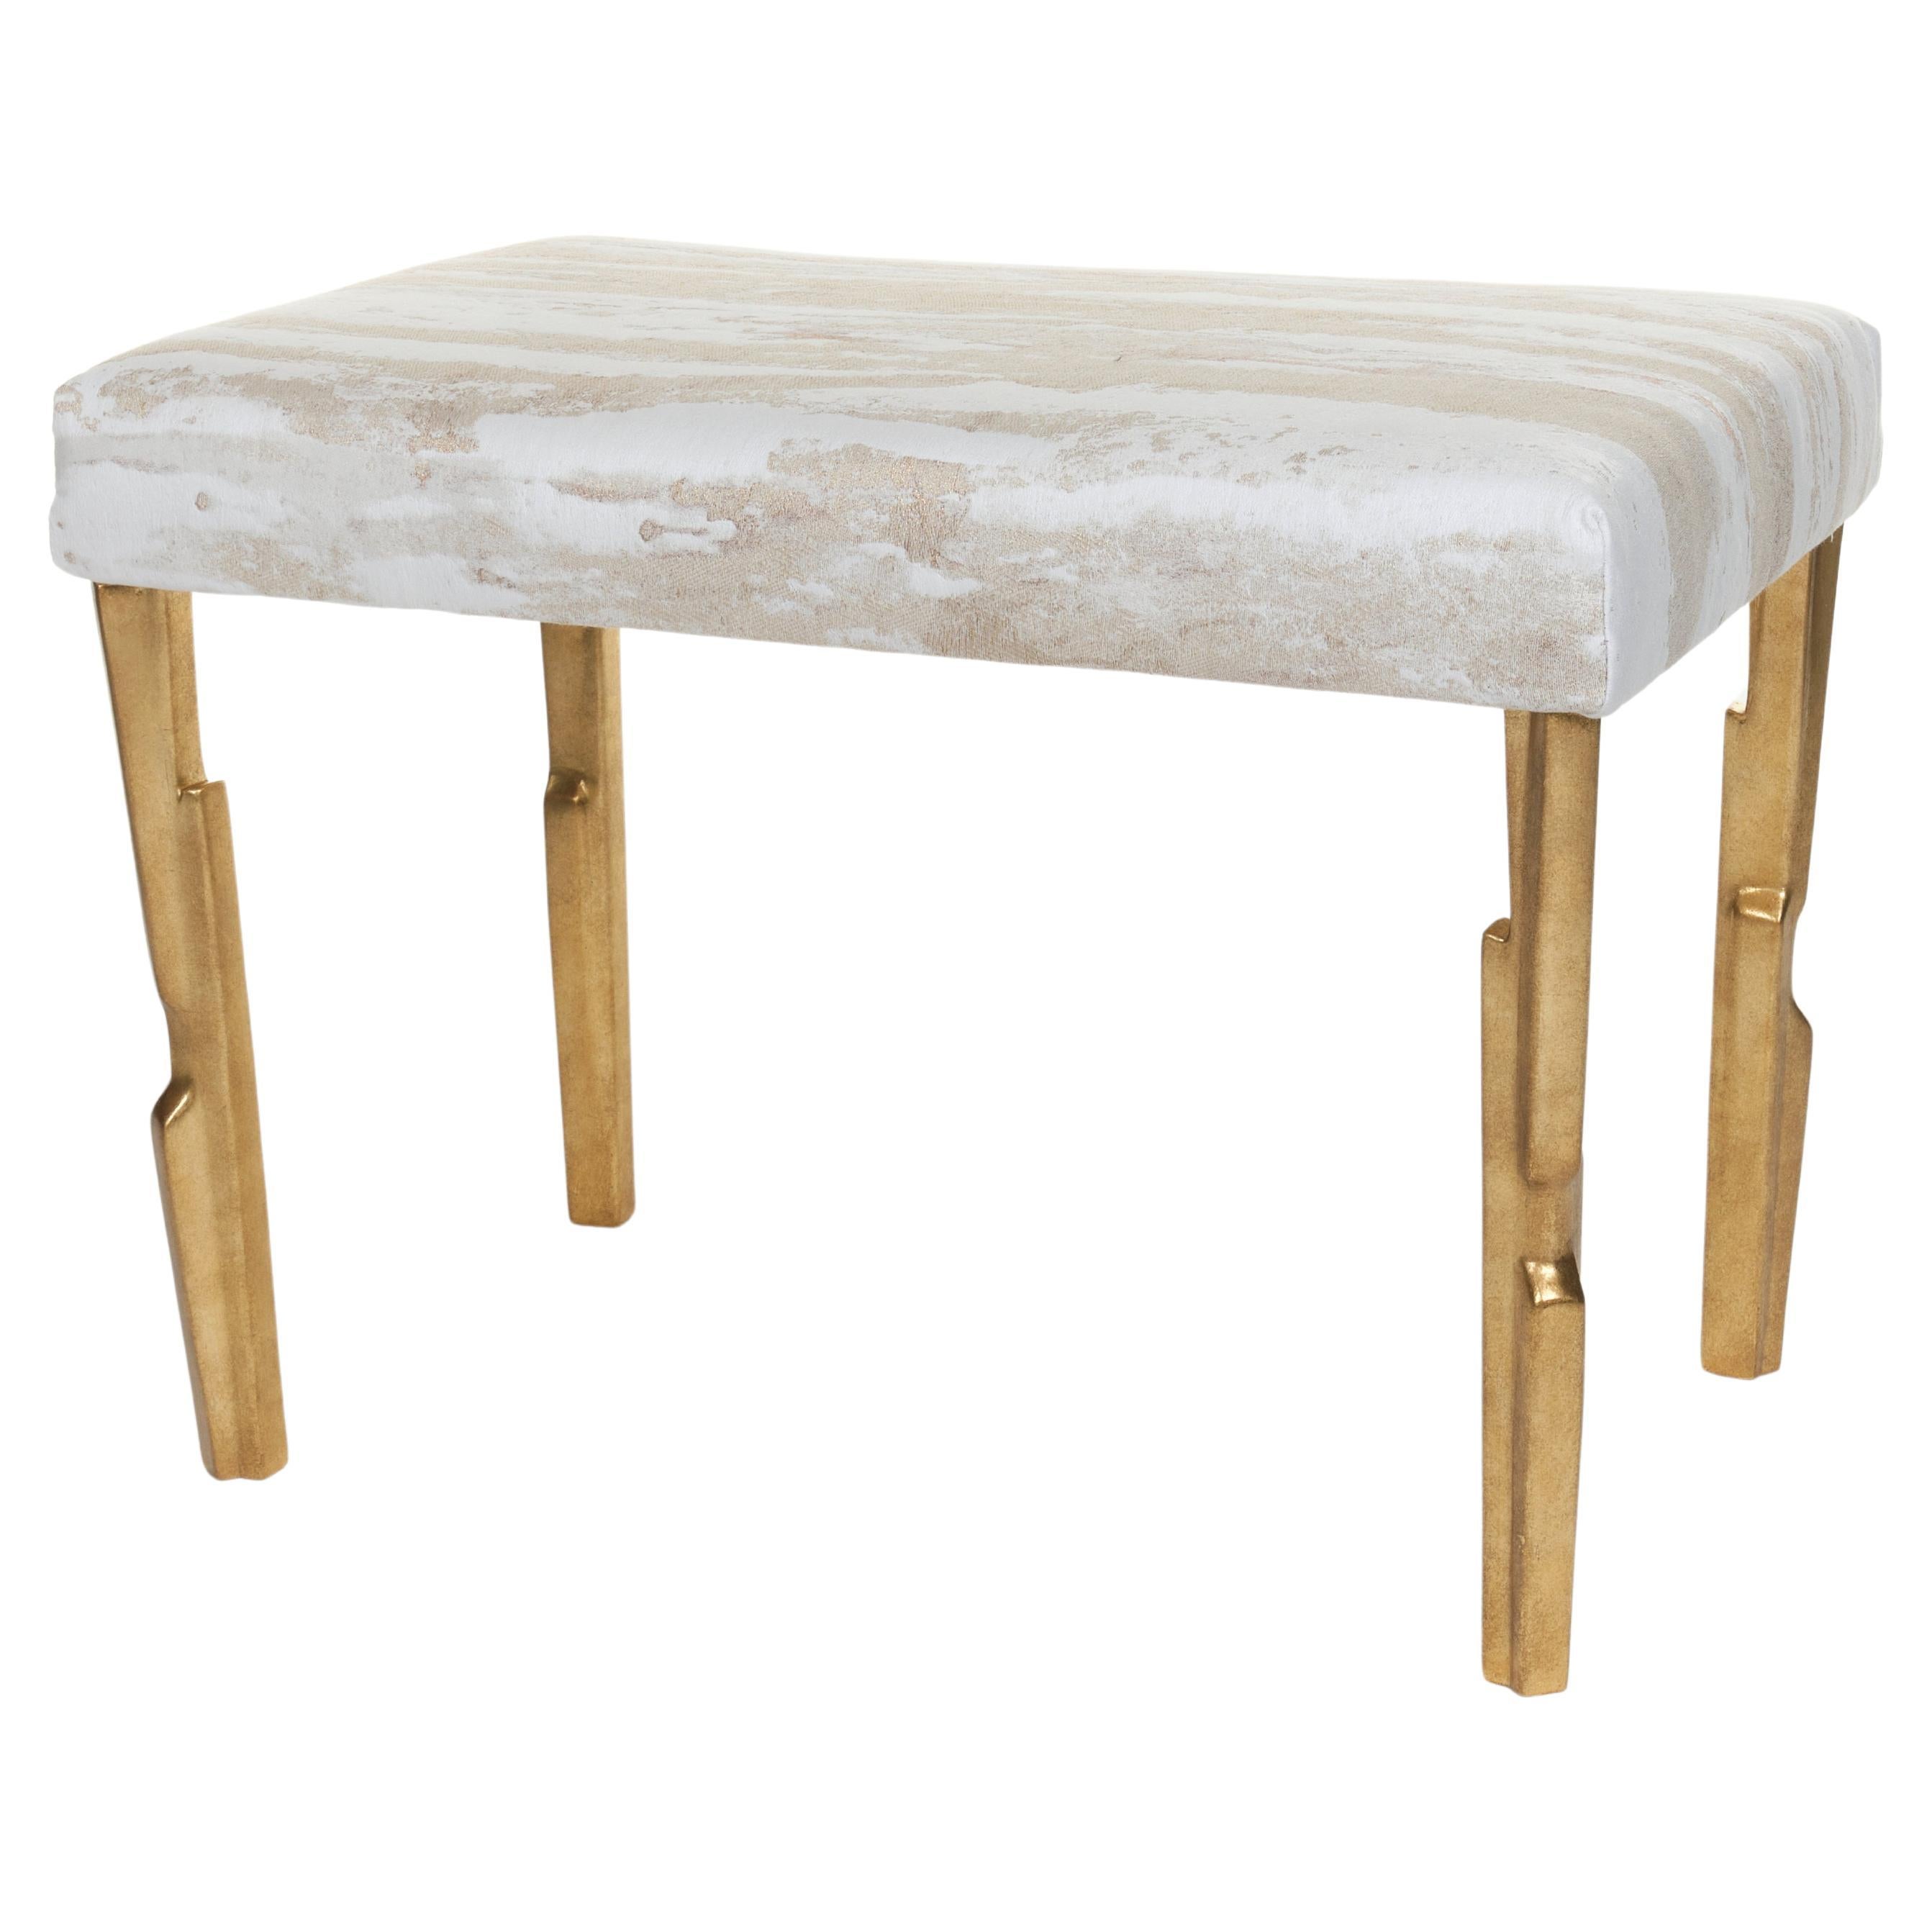 Modern Linea Stool No.1, Antique Gold Finish with Second Firing 2 seat pad For Sale